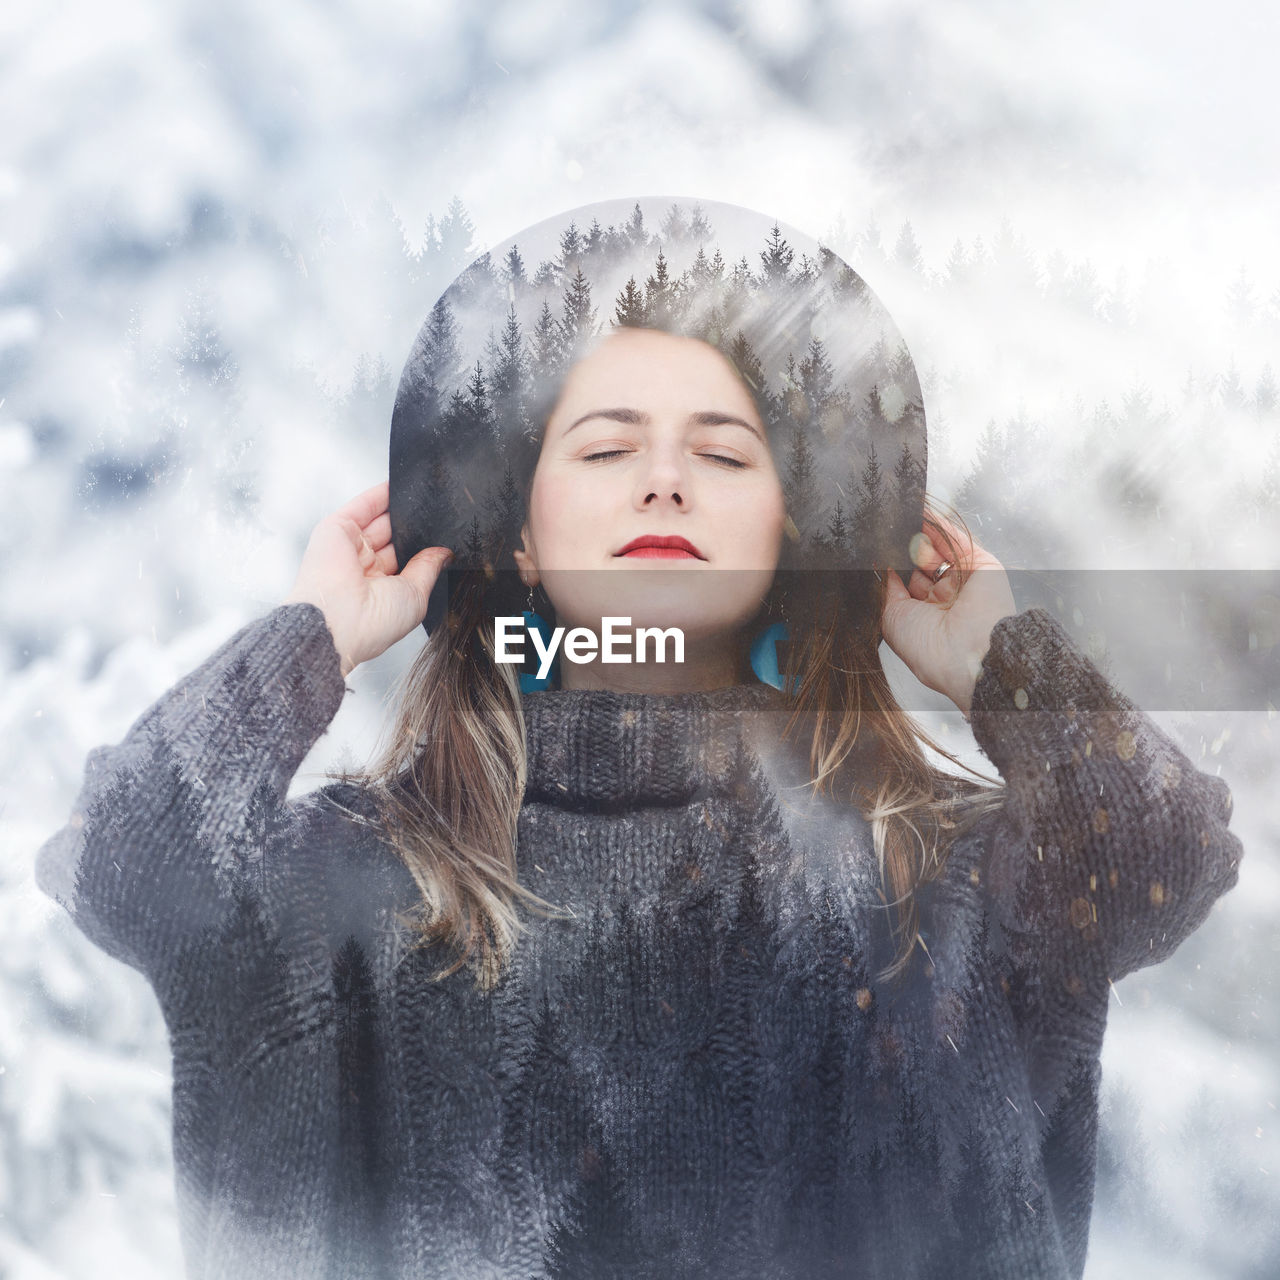 Double exposure image of woman with eyes closed and forest during winter